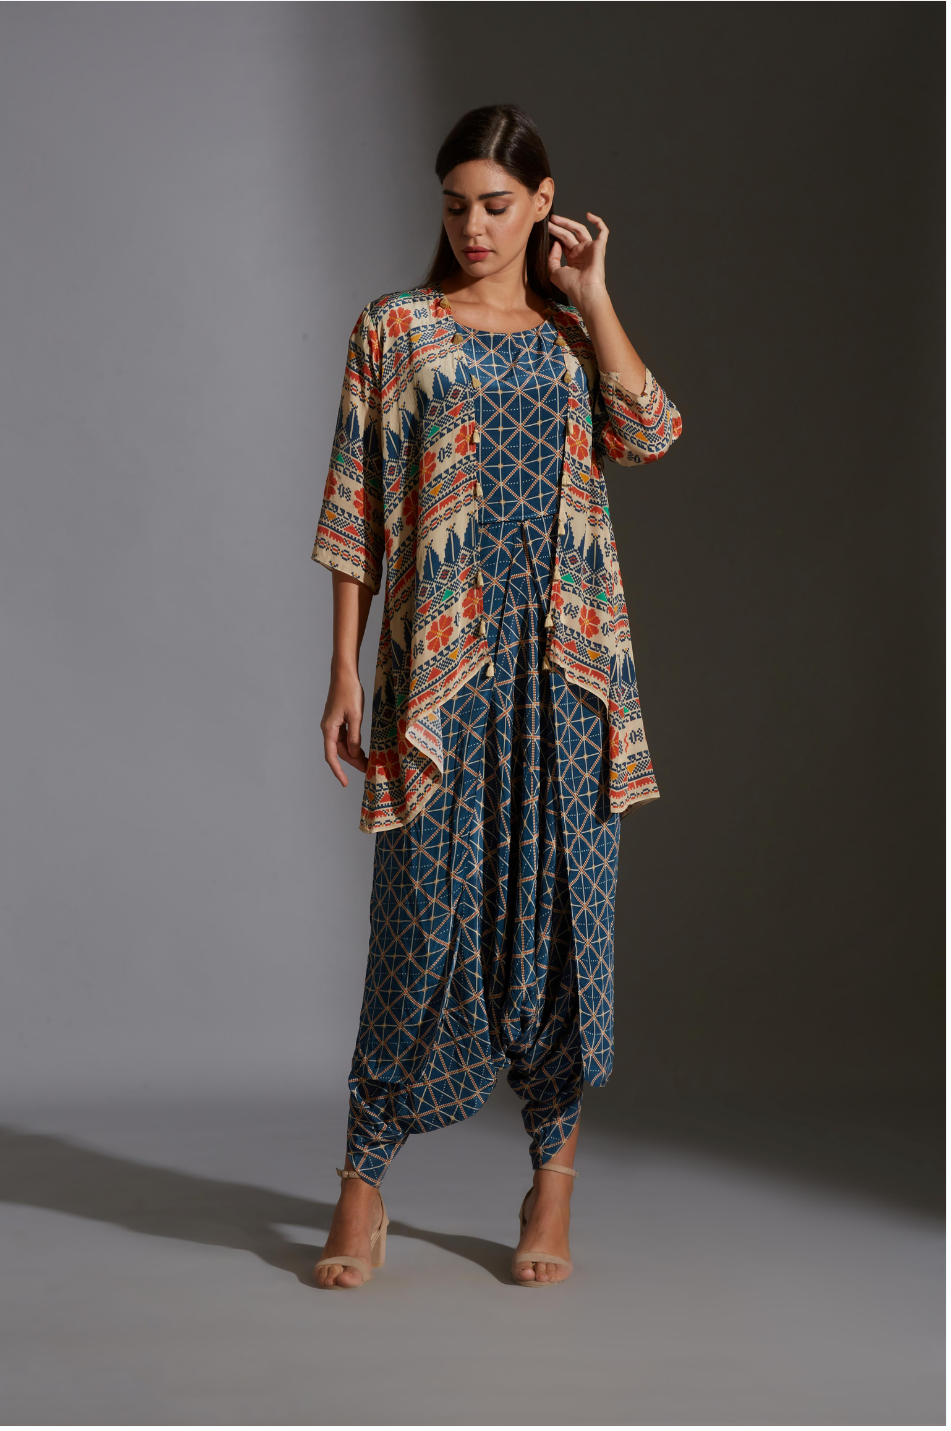 Image of DHOTI JUMPSUIT WITH SHORT JACKET. From savoirfashions.com